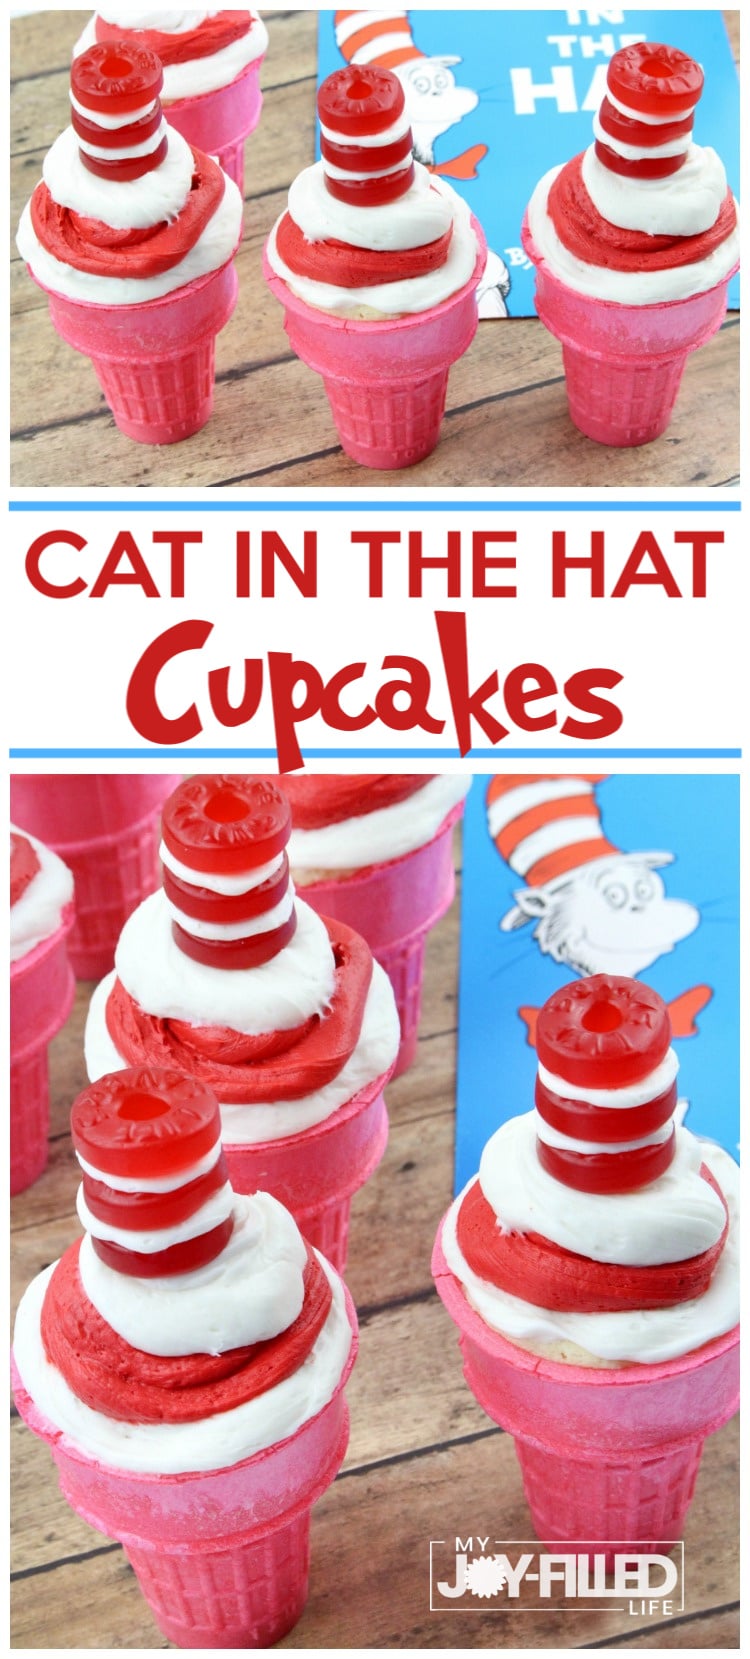 Cupcakes made in ice cream cones and deocrated to look like the hat from Dr. Seuss' The Cat in the Hat